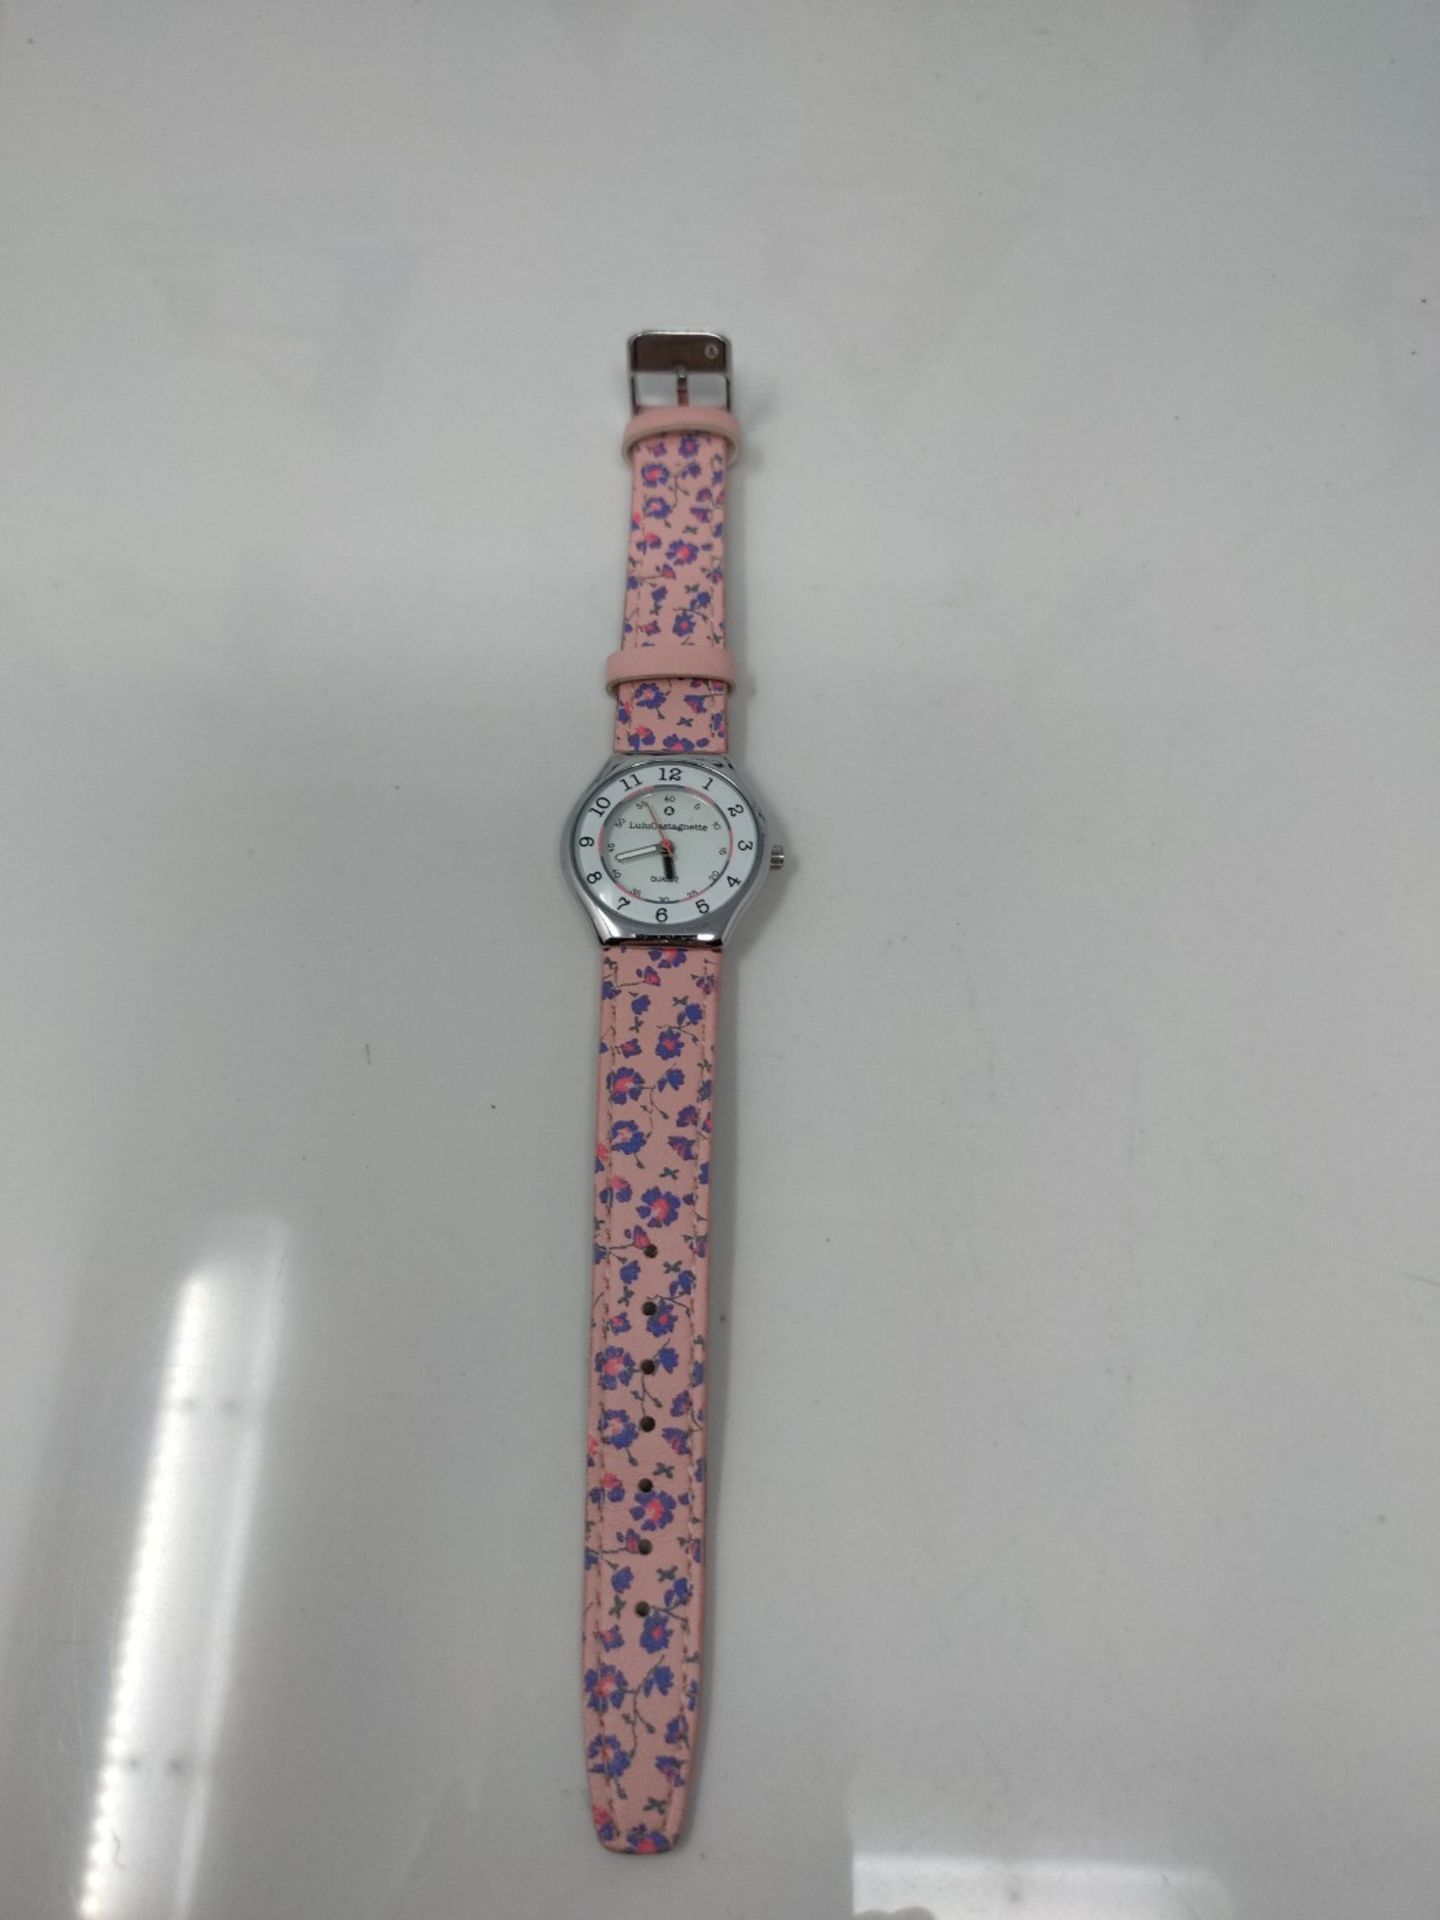 Lulu Castagnette Girl's Analogue Quartz Watch with Leather Strap 38827 - Image 3 of 3